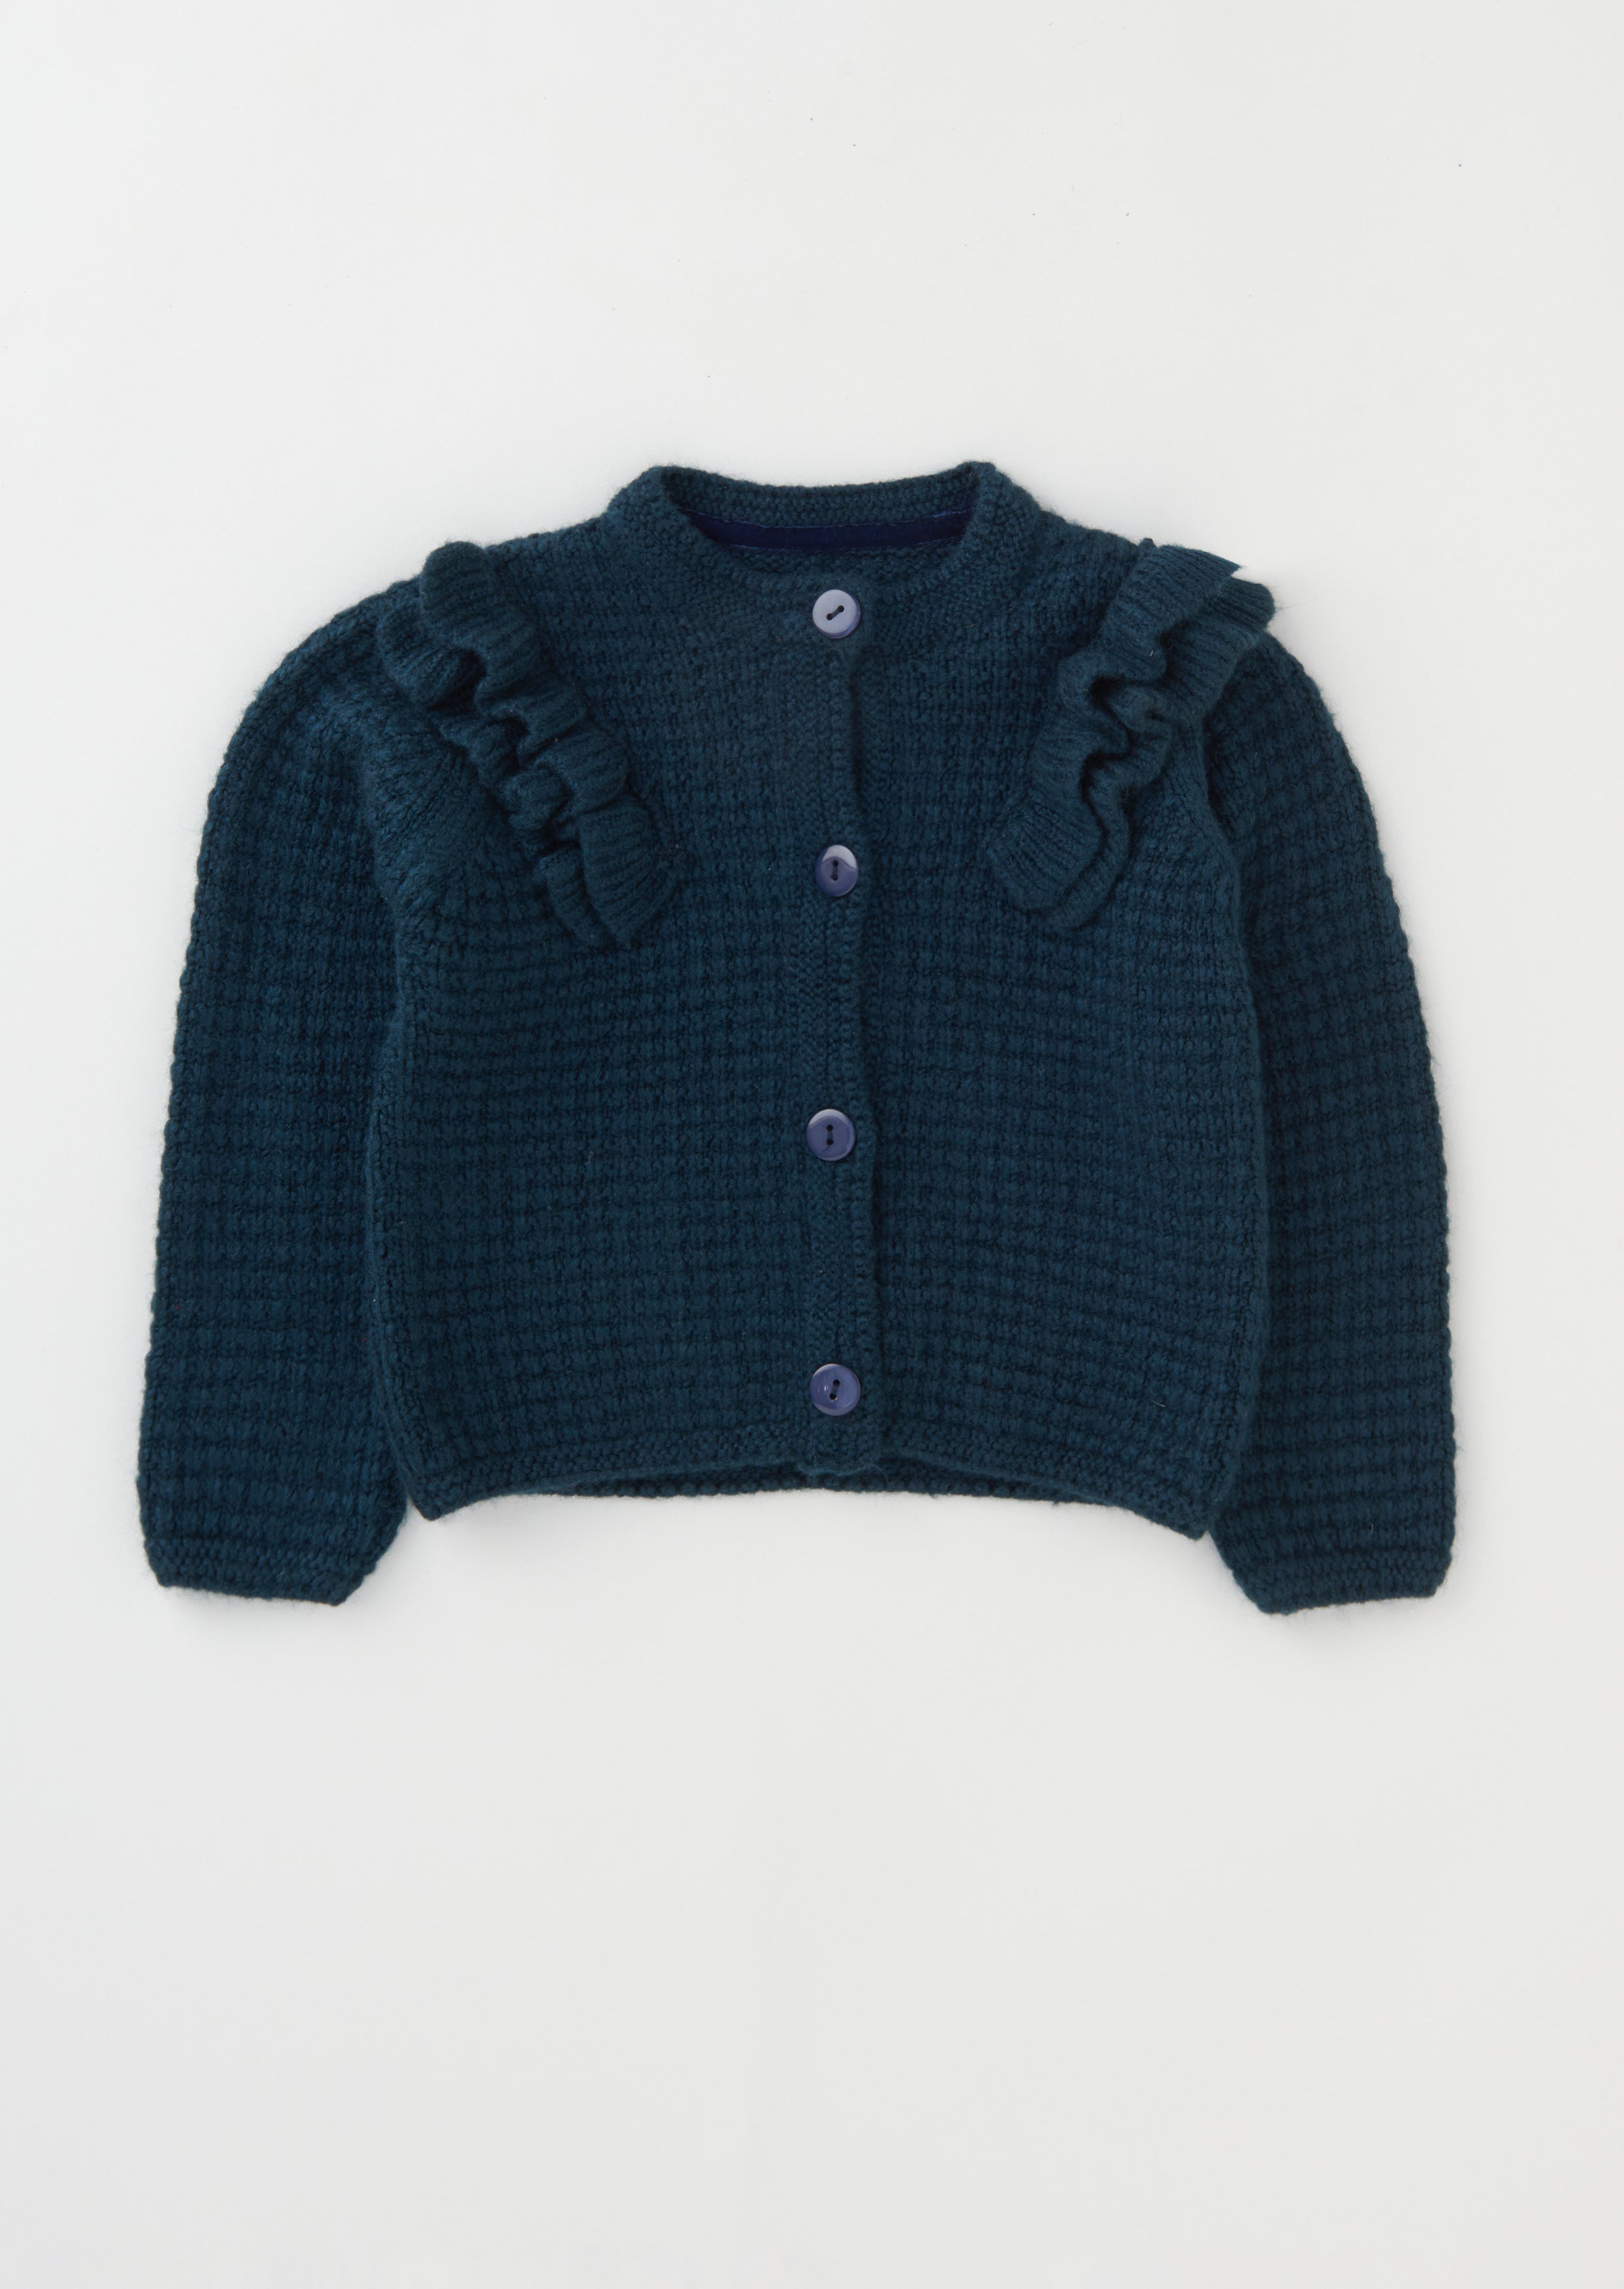 Baby Girl Solid Navy Sweater with Frill Shoulder